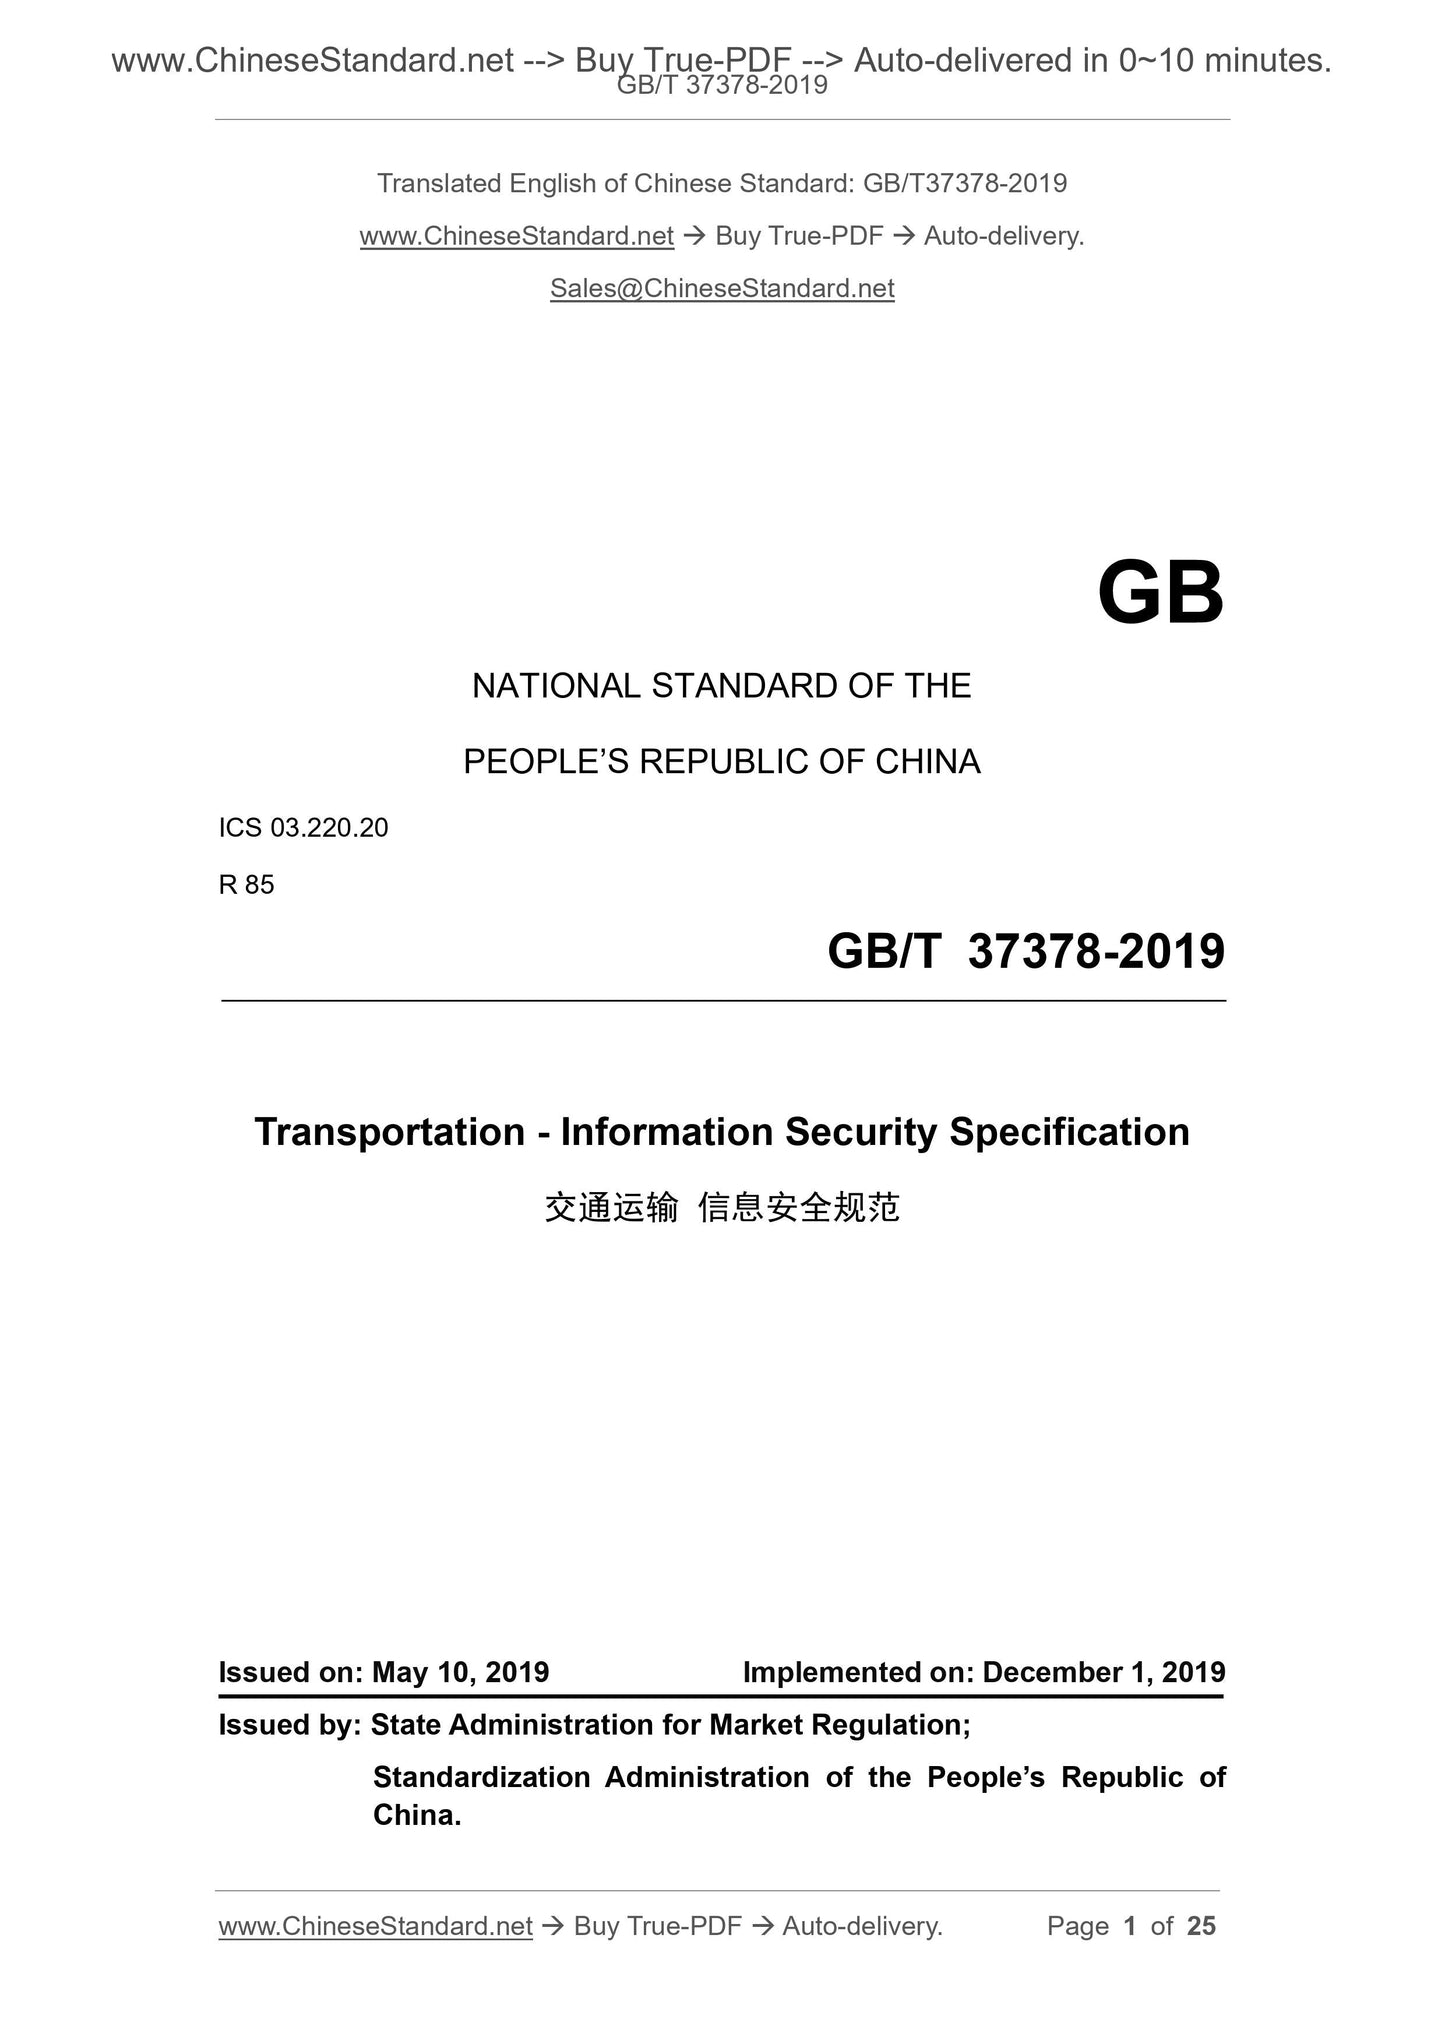 GB/T 37378-2019 Page 1